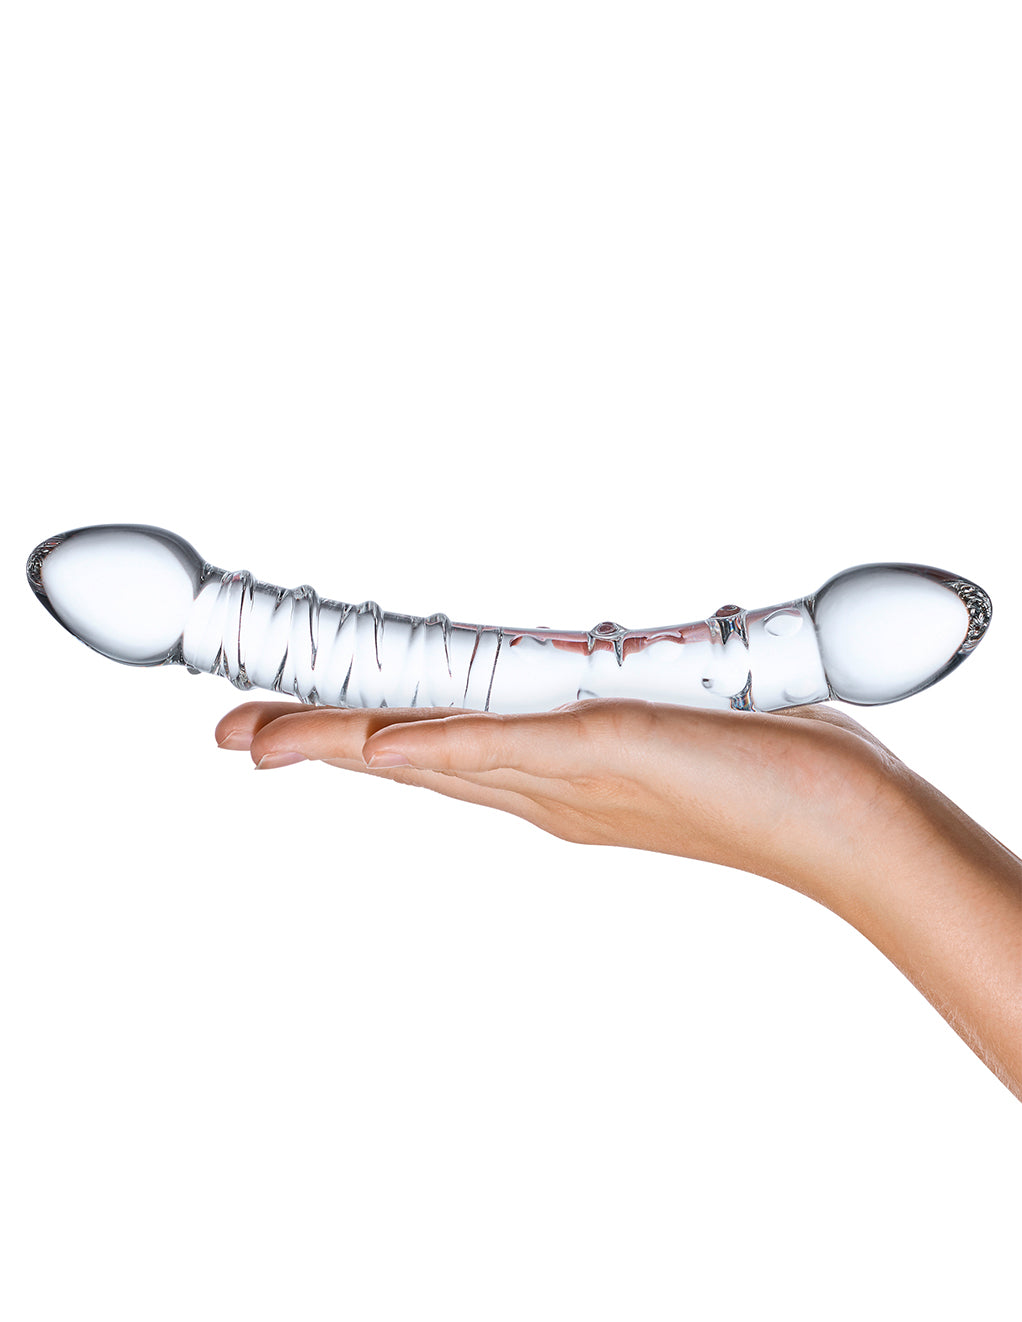 Glas Double Trouble 10" Dildo- In Hand